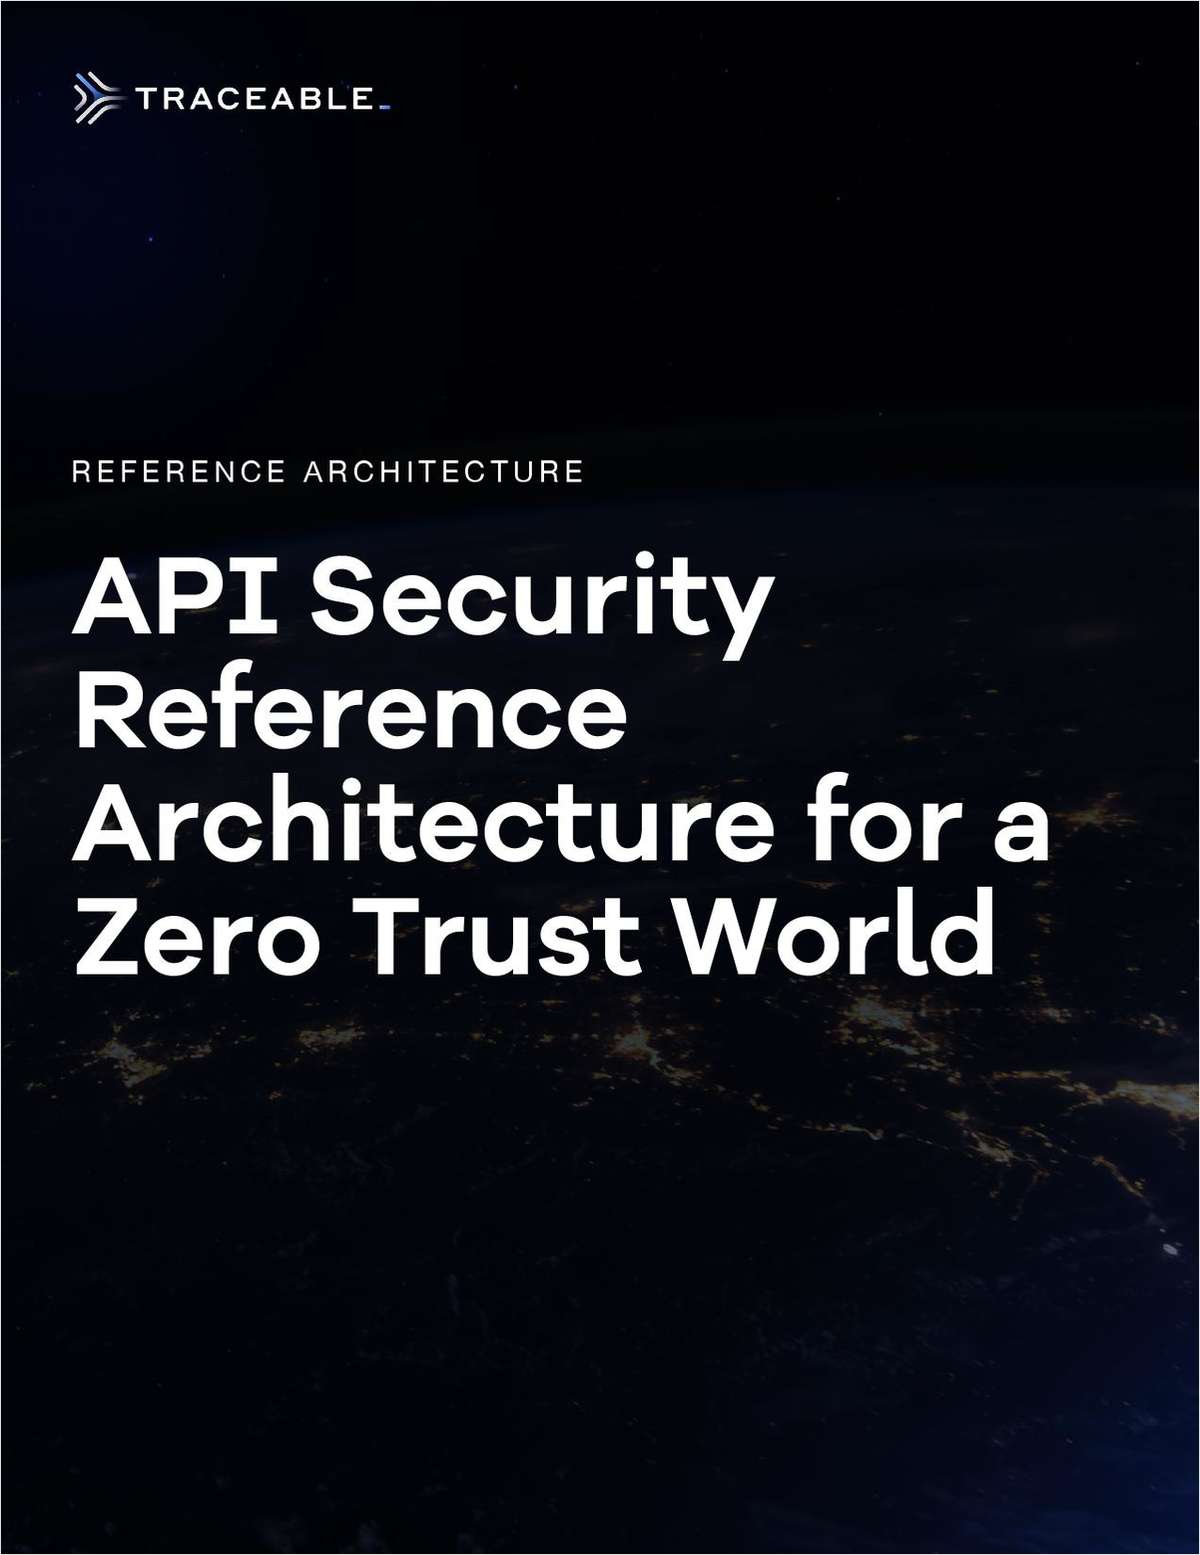 API Security Reference Architecture for a Zero Trust World